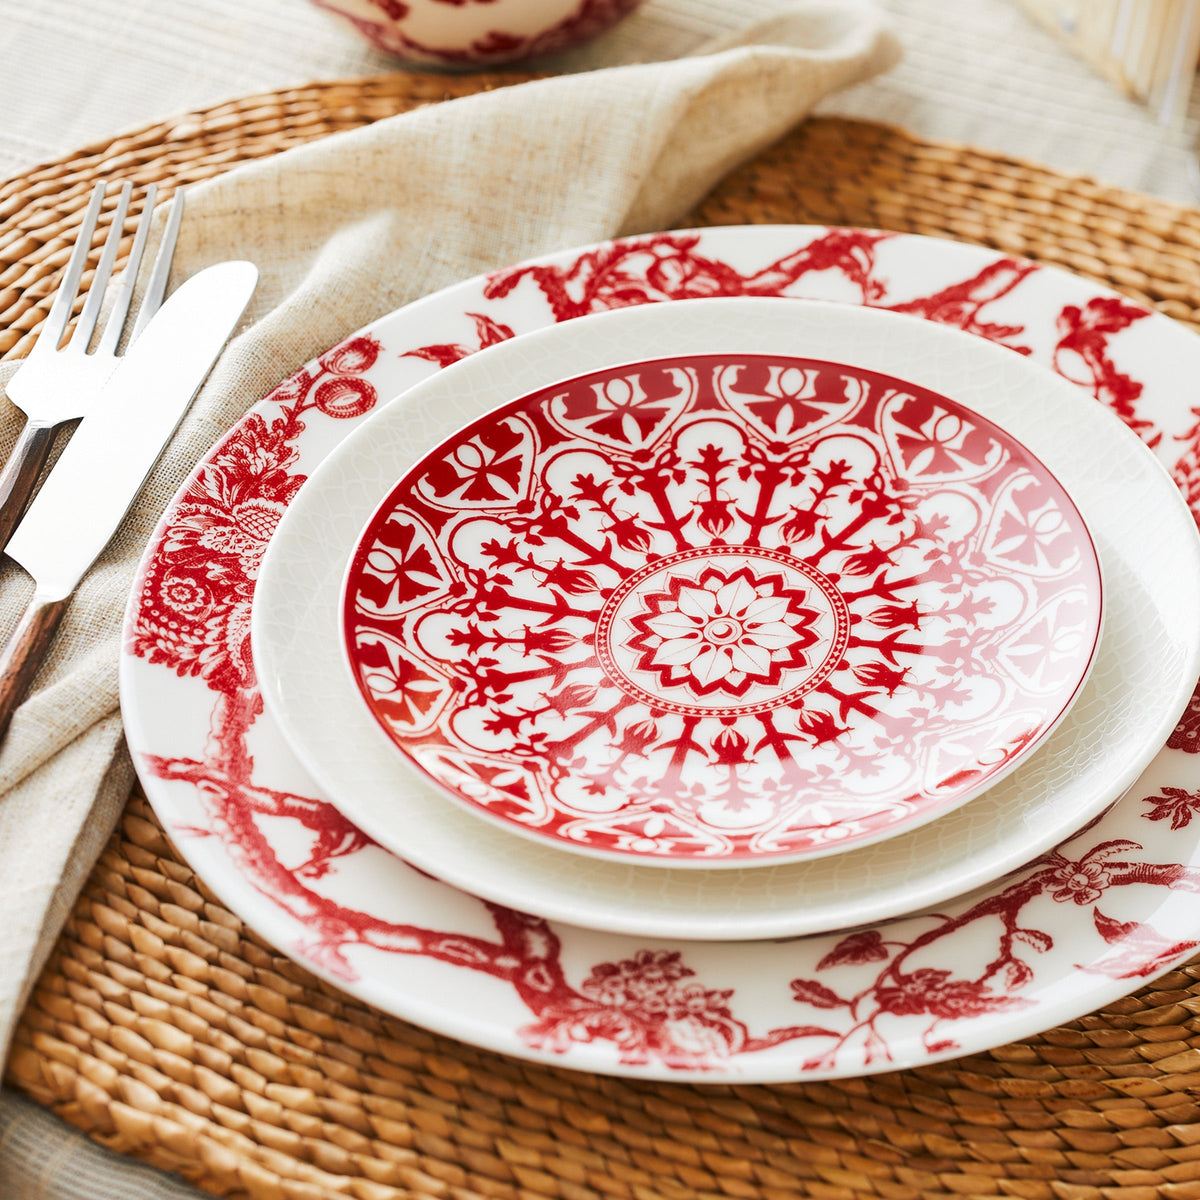 Arcadia Crimson red and white premium porcelain dinner plate from Caskata paired with a red and white Casablanca canape plate on a rattan placemat.